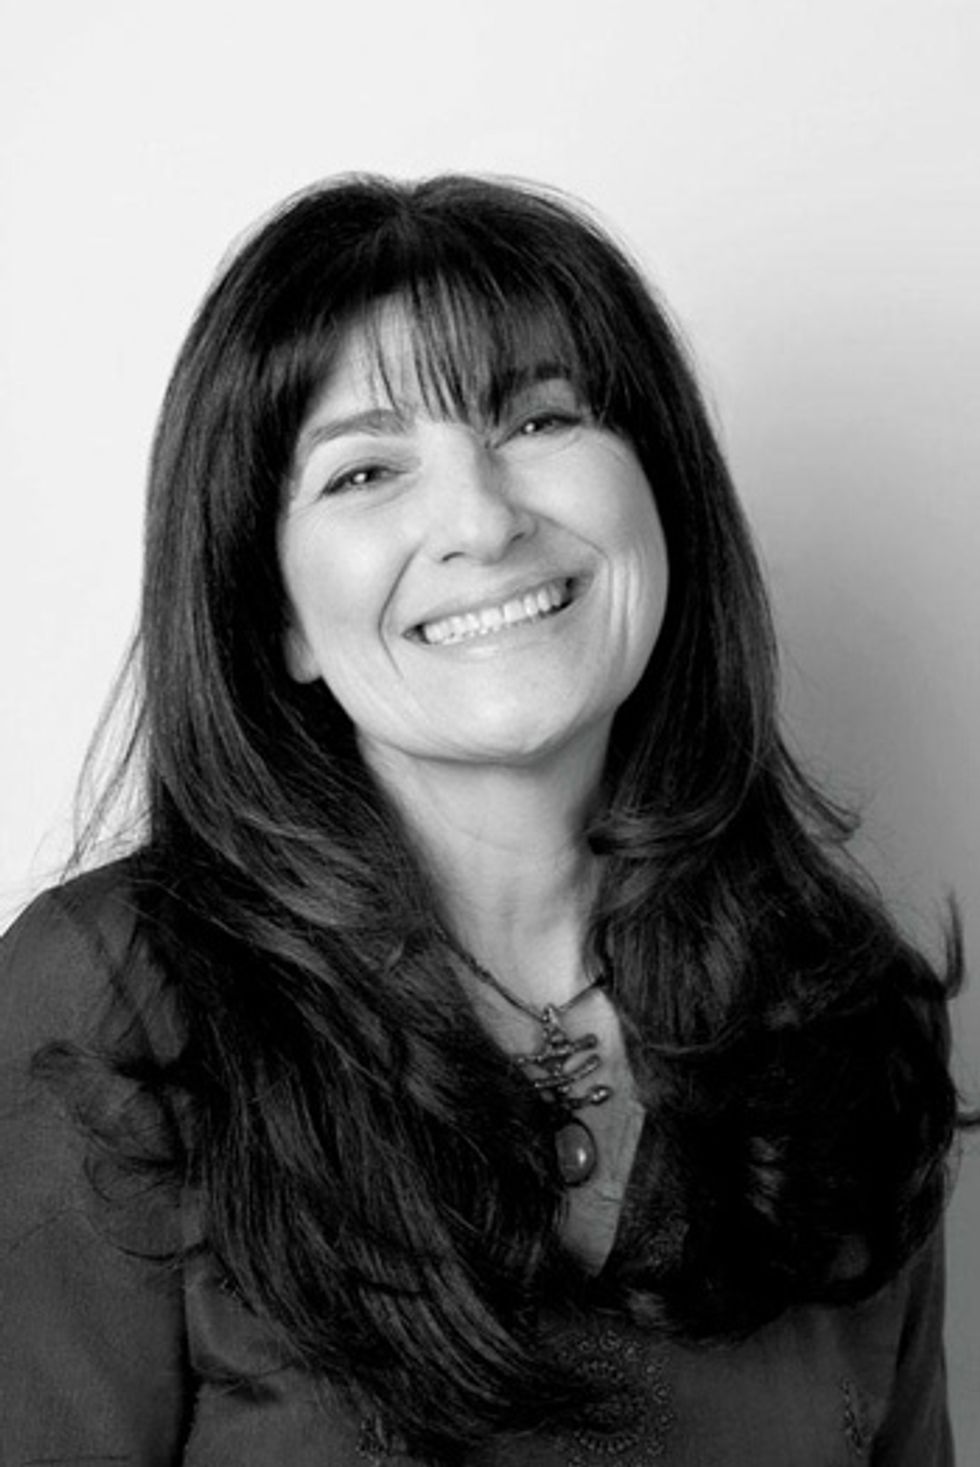 Food Writer Ruth Reichl on Tweeting, Baking, Writing, and Too Much Drinking